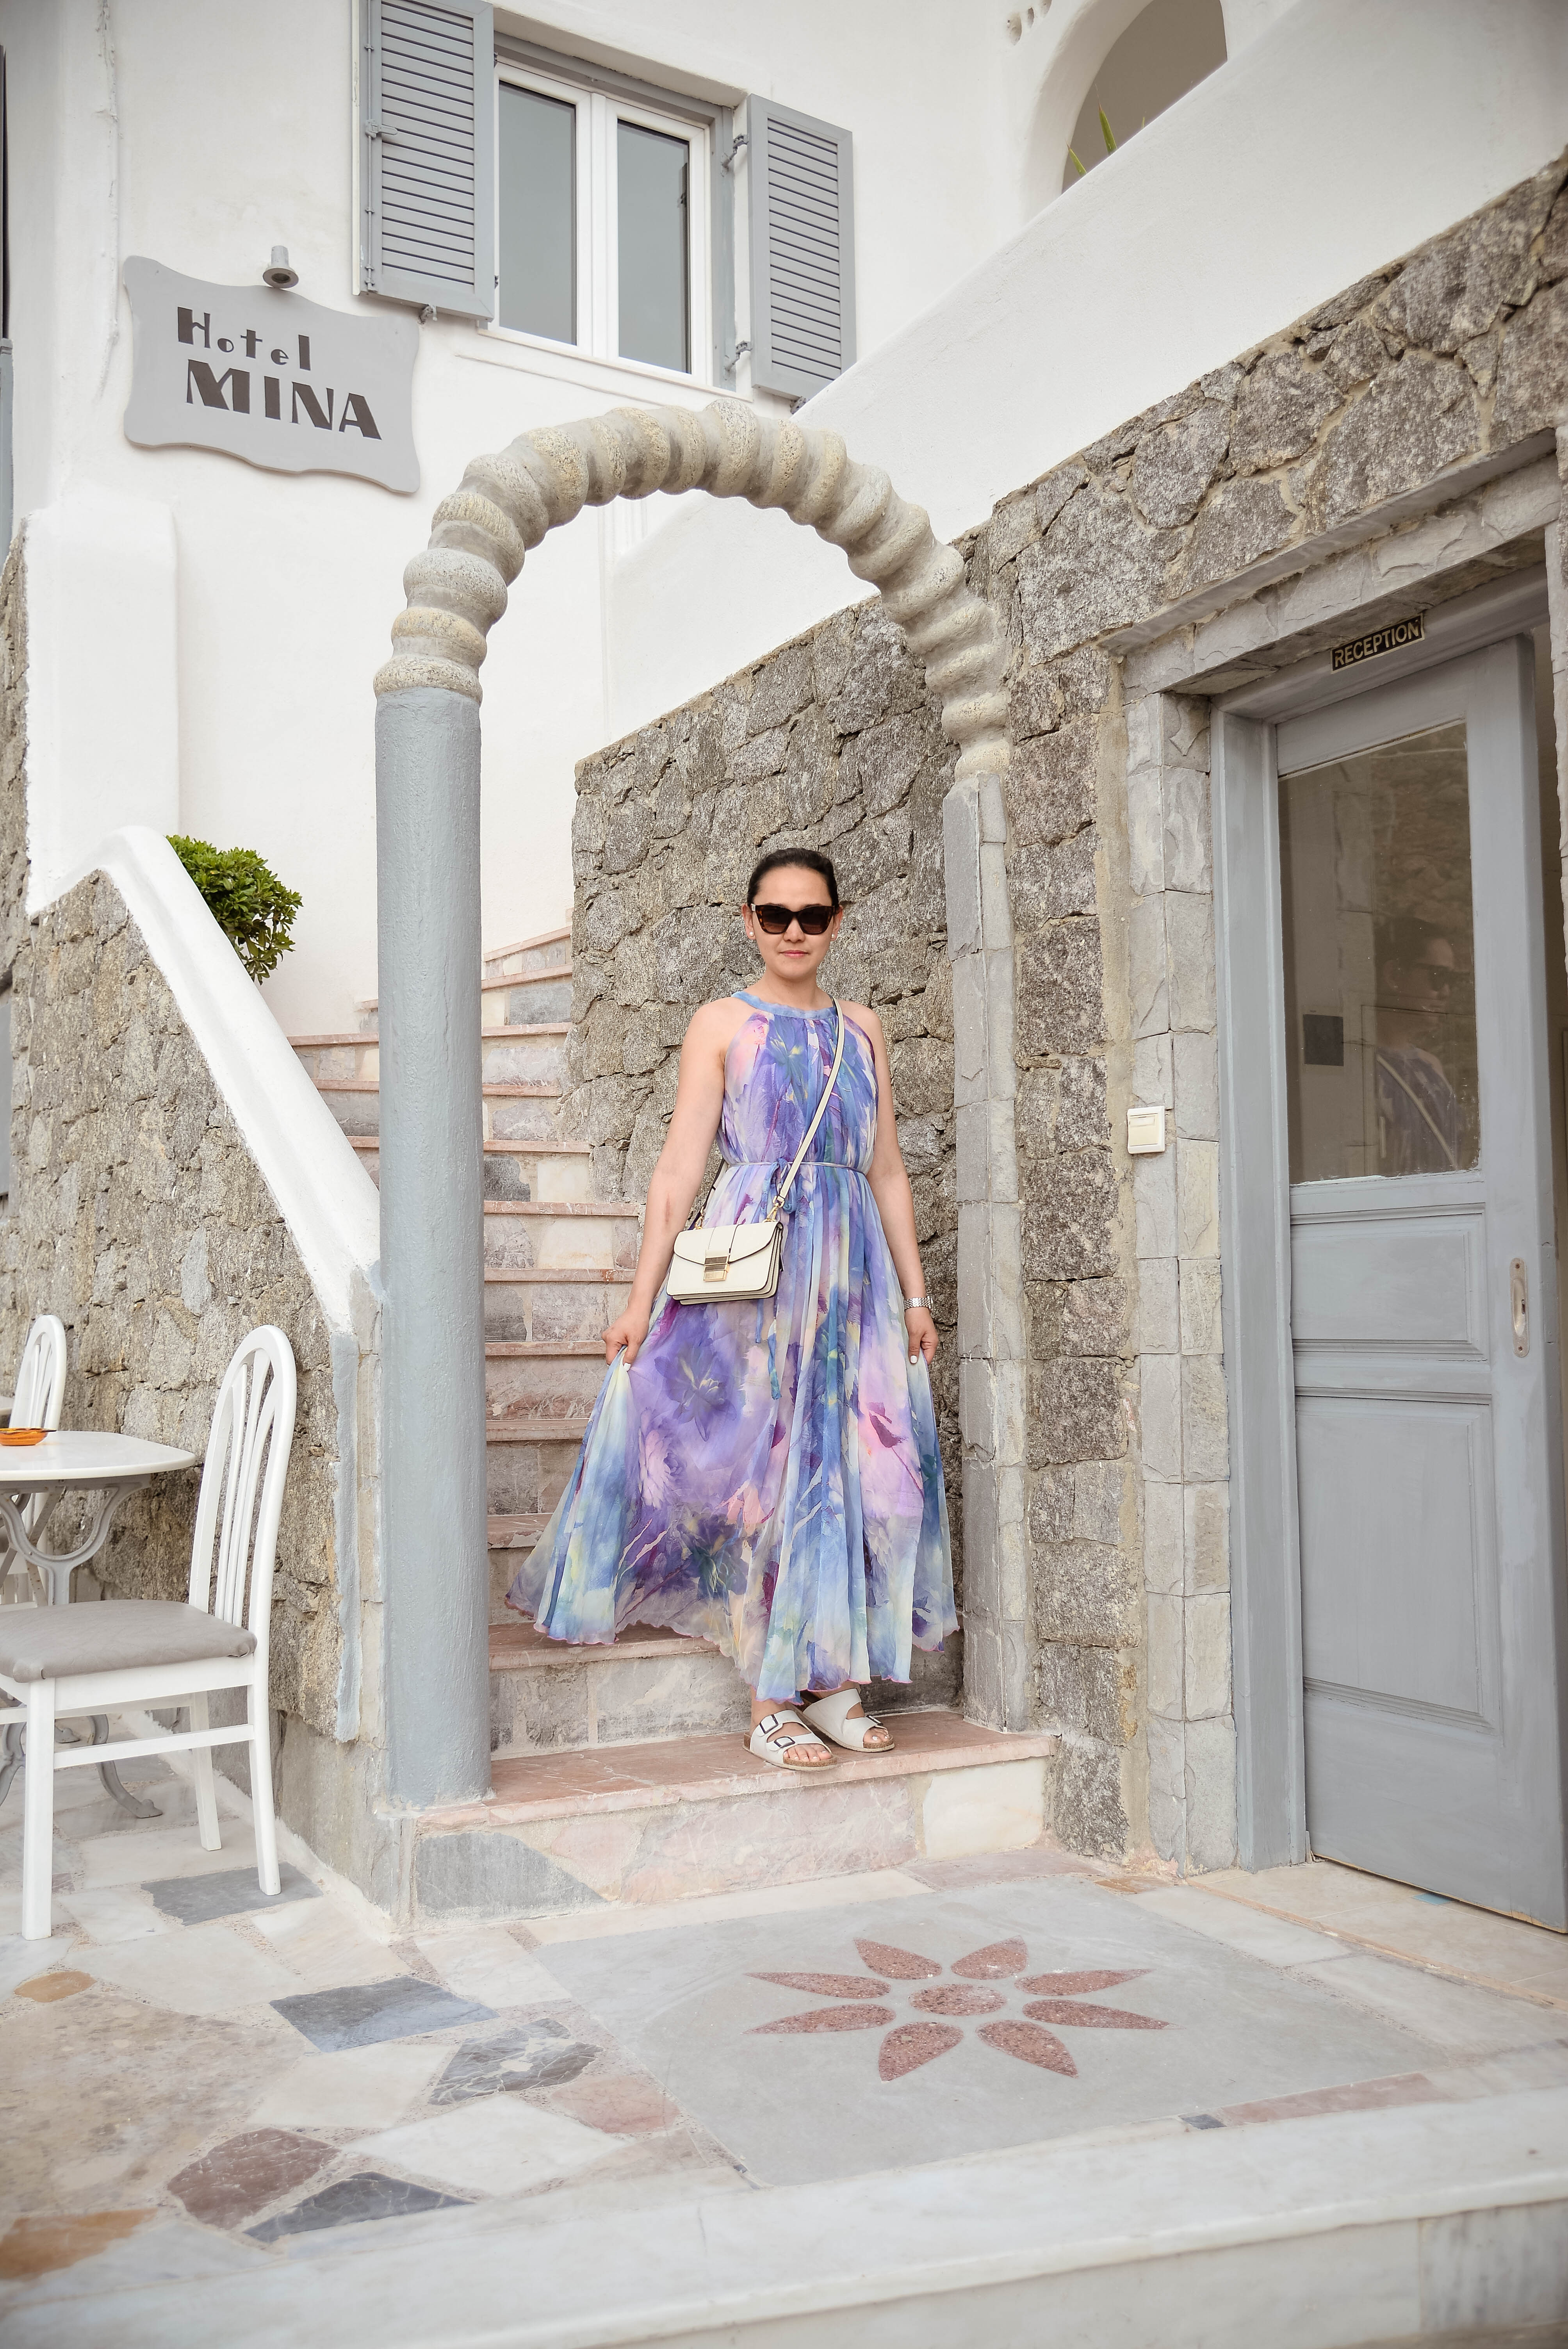 Beach Day In Mykonos With My Perfect All Day Maxi Dress